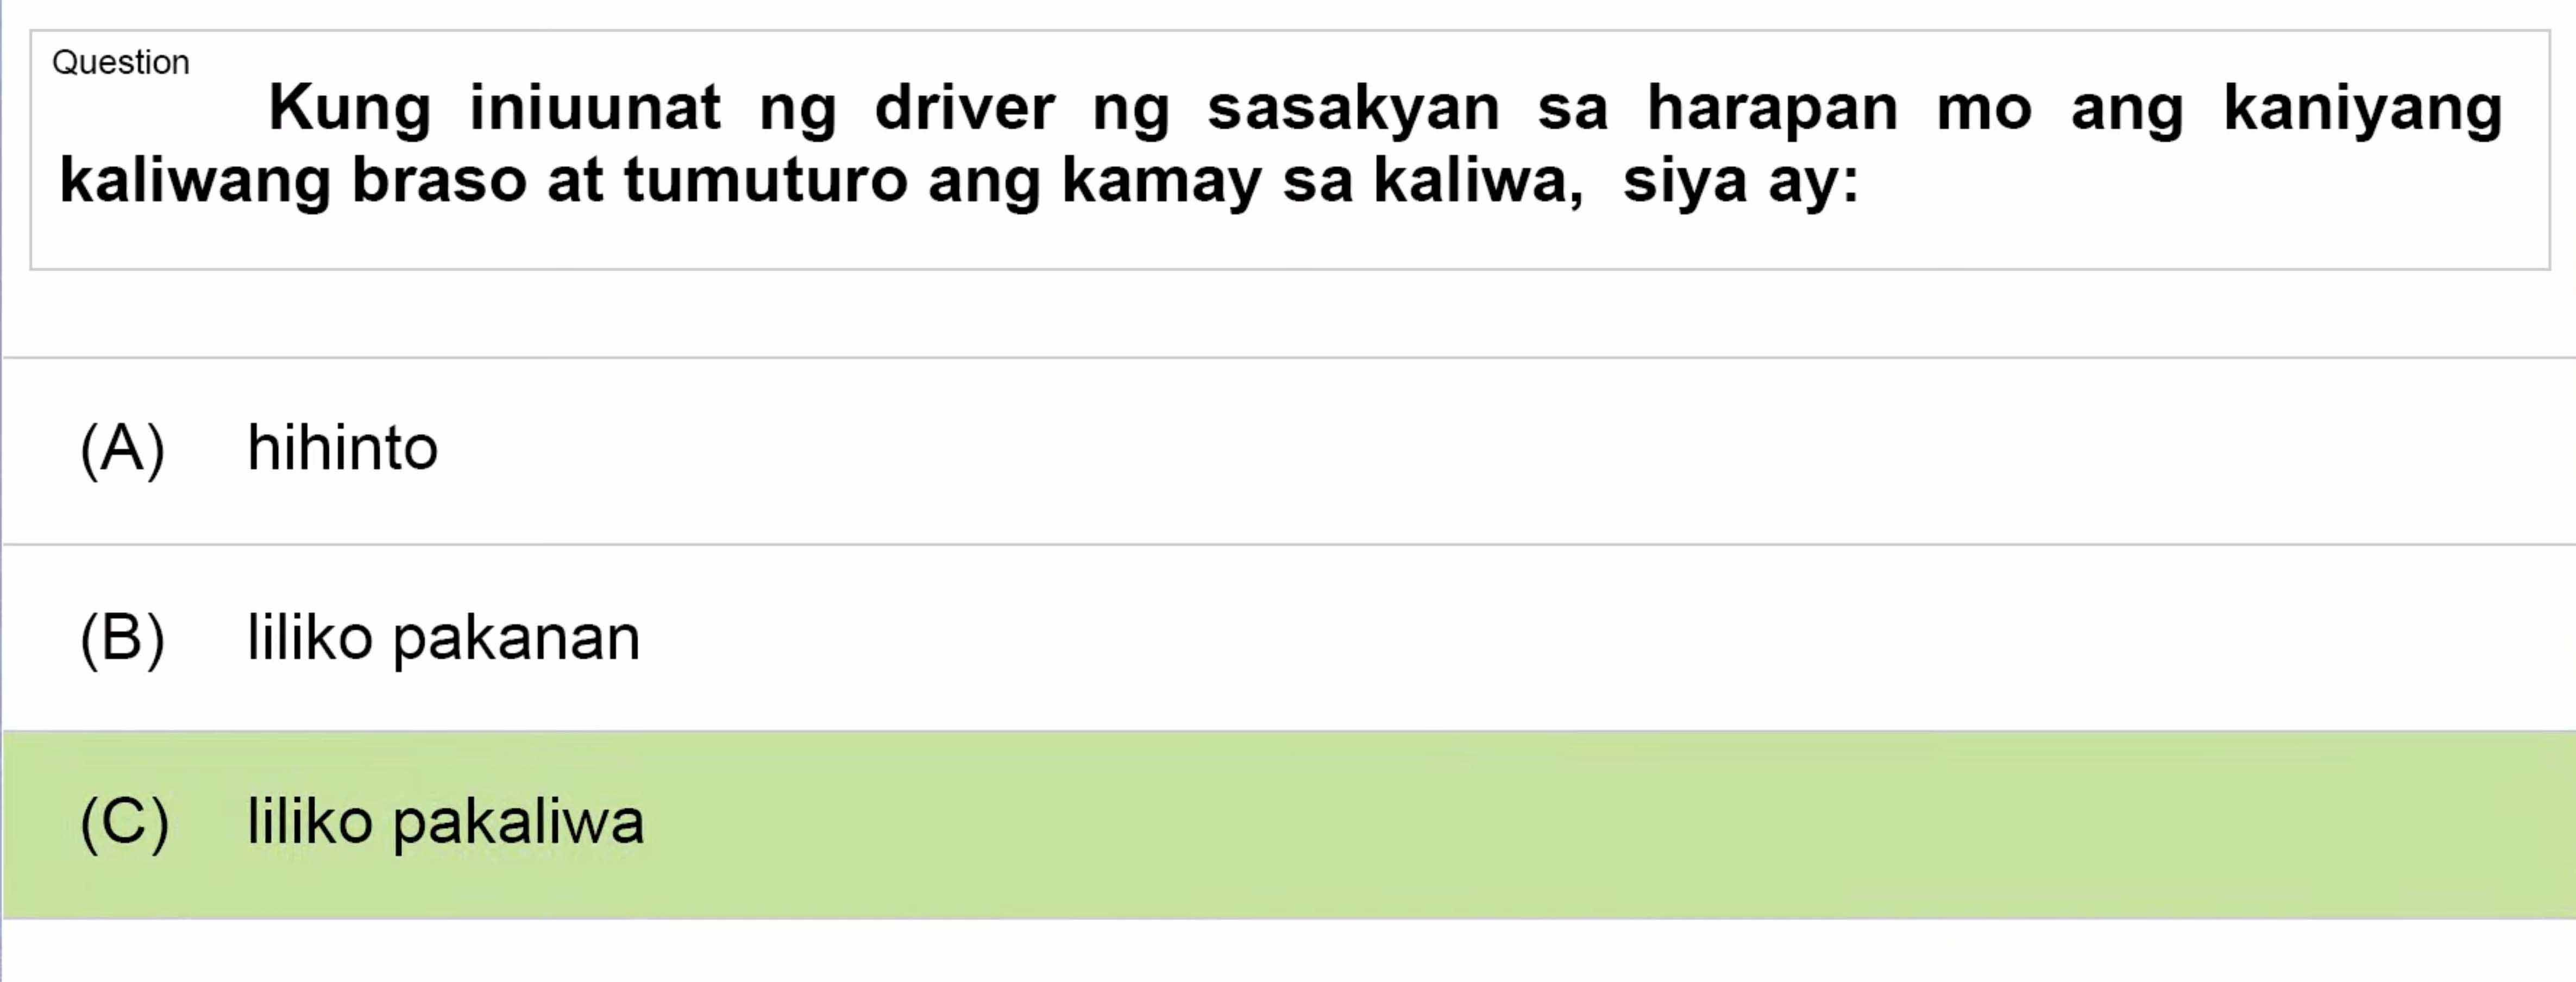 LTO Tagalog non professional exam reviewer light vehicle 2 (23)